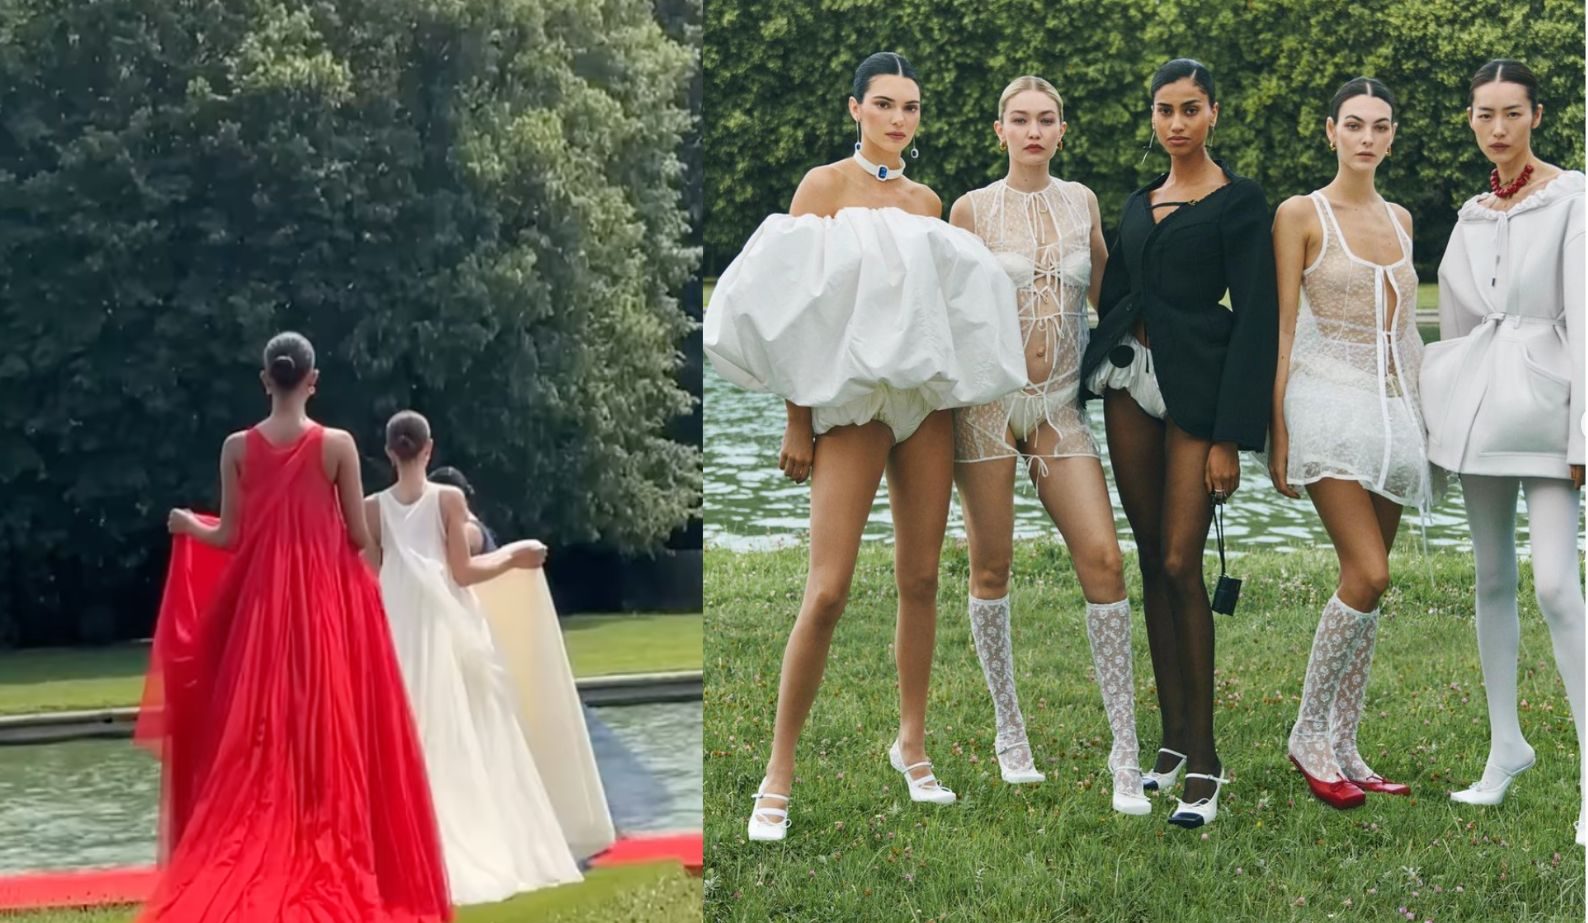 Jacquemus Doesn't Need an Instagrammable Backdrop to Create a